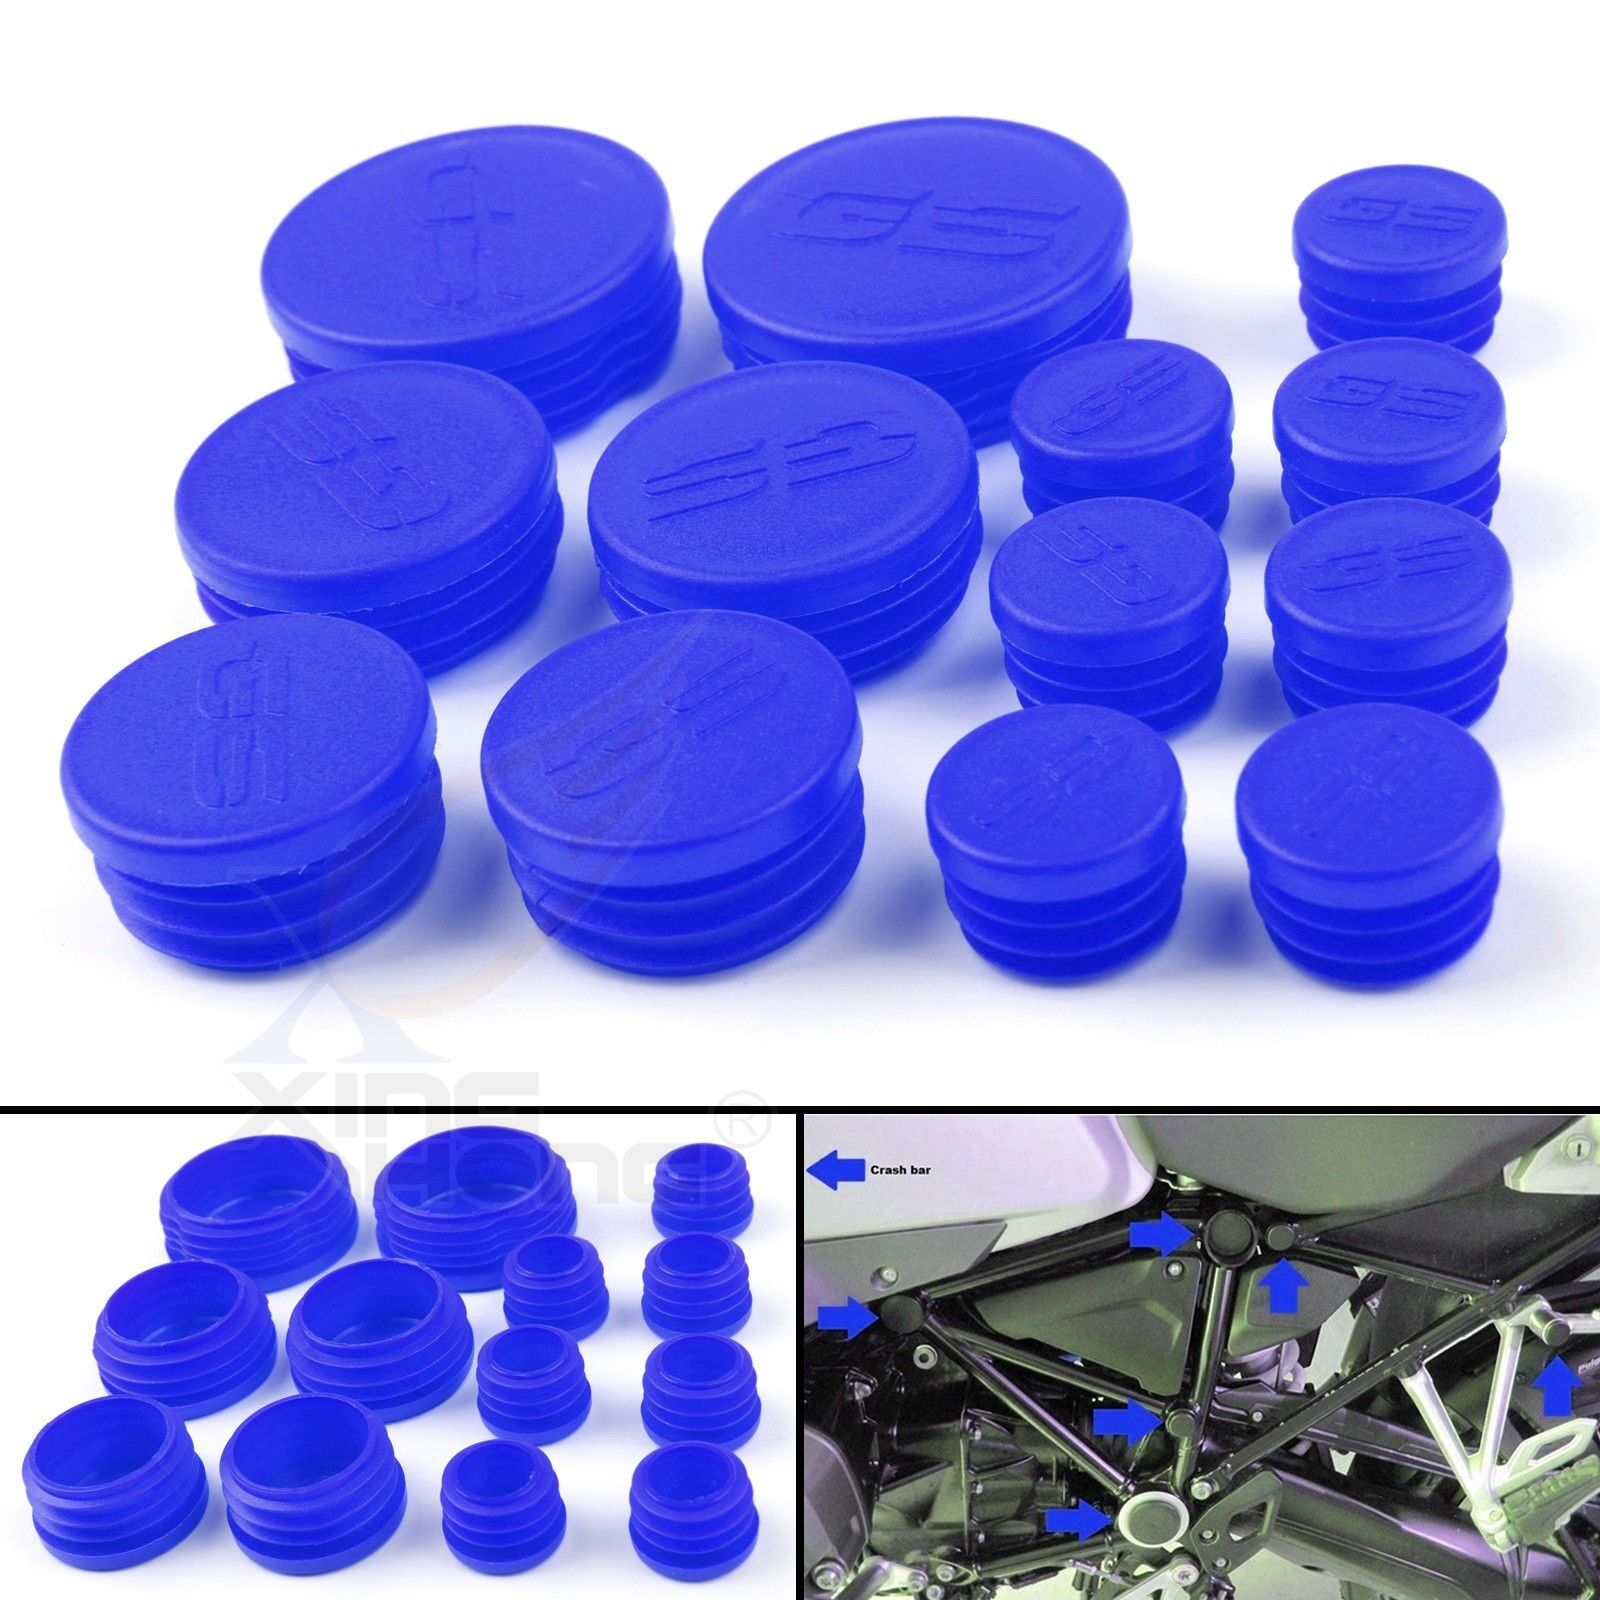 Replacement of Frame Hole Caps Decor Cover Plugs Kit For 2013 14 BMW R1200GS/LS